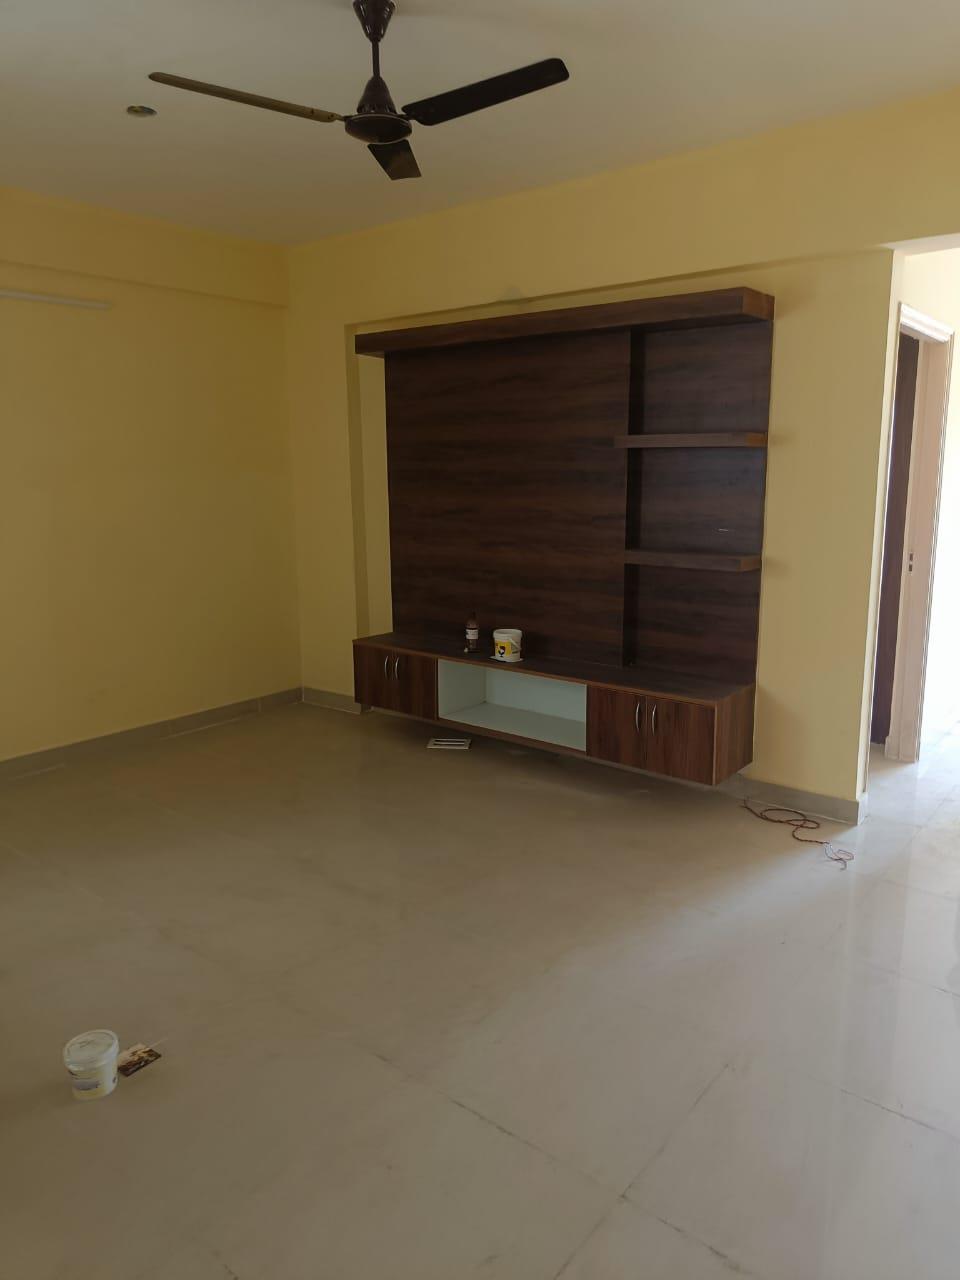 1 BHK Independent House for Lease Only at JAML2 - 1473 in Vignana Nagar